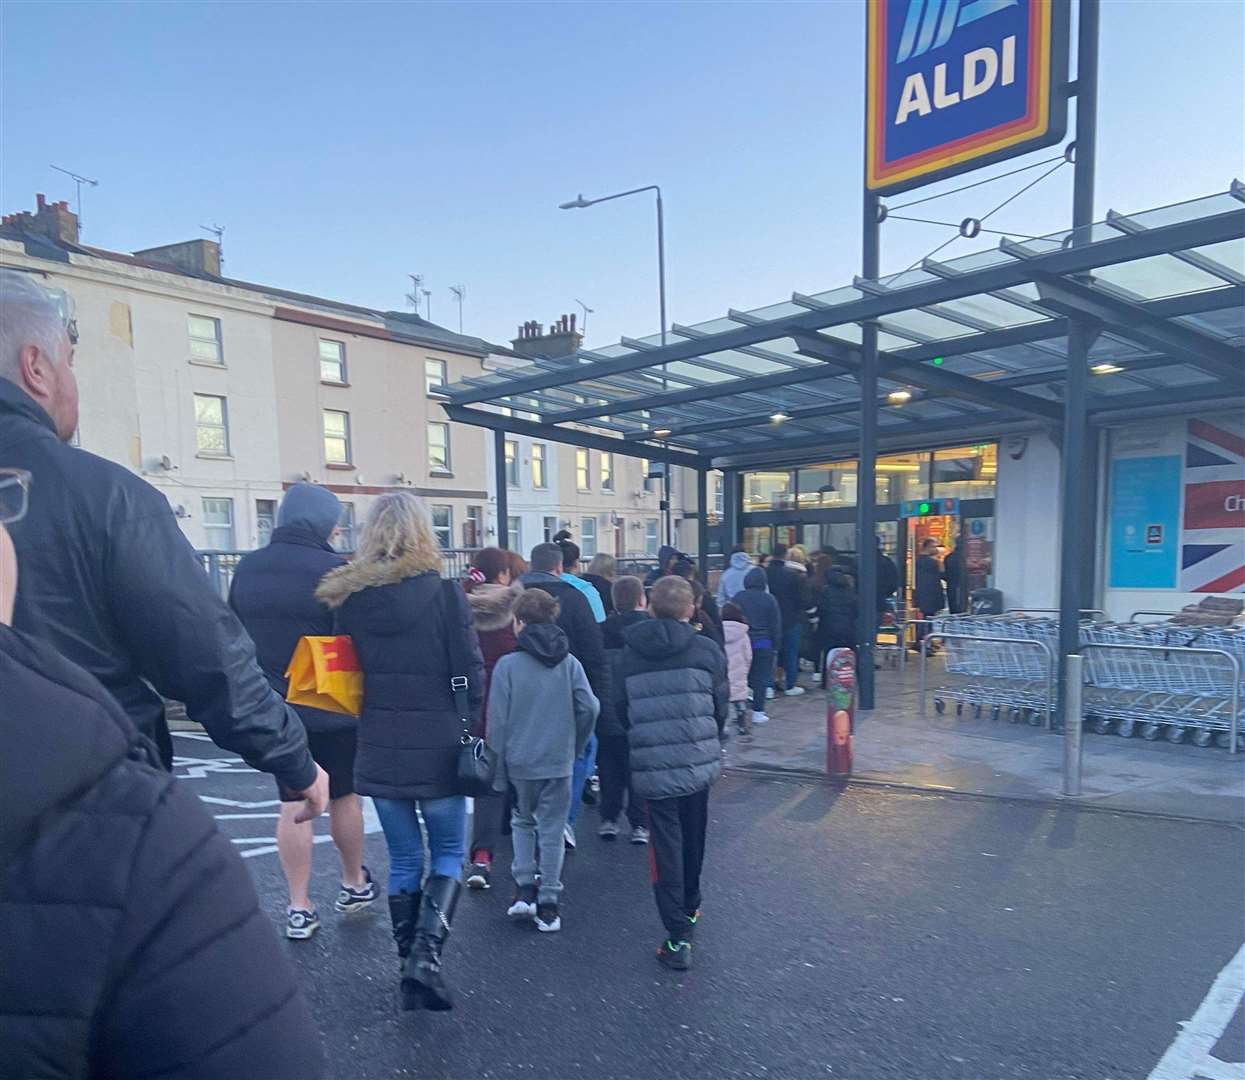 There were long queues at Aldi in December